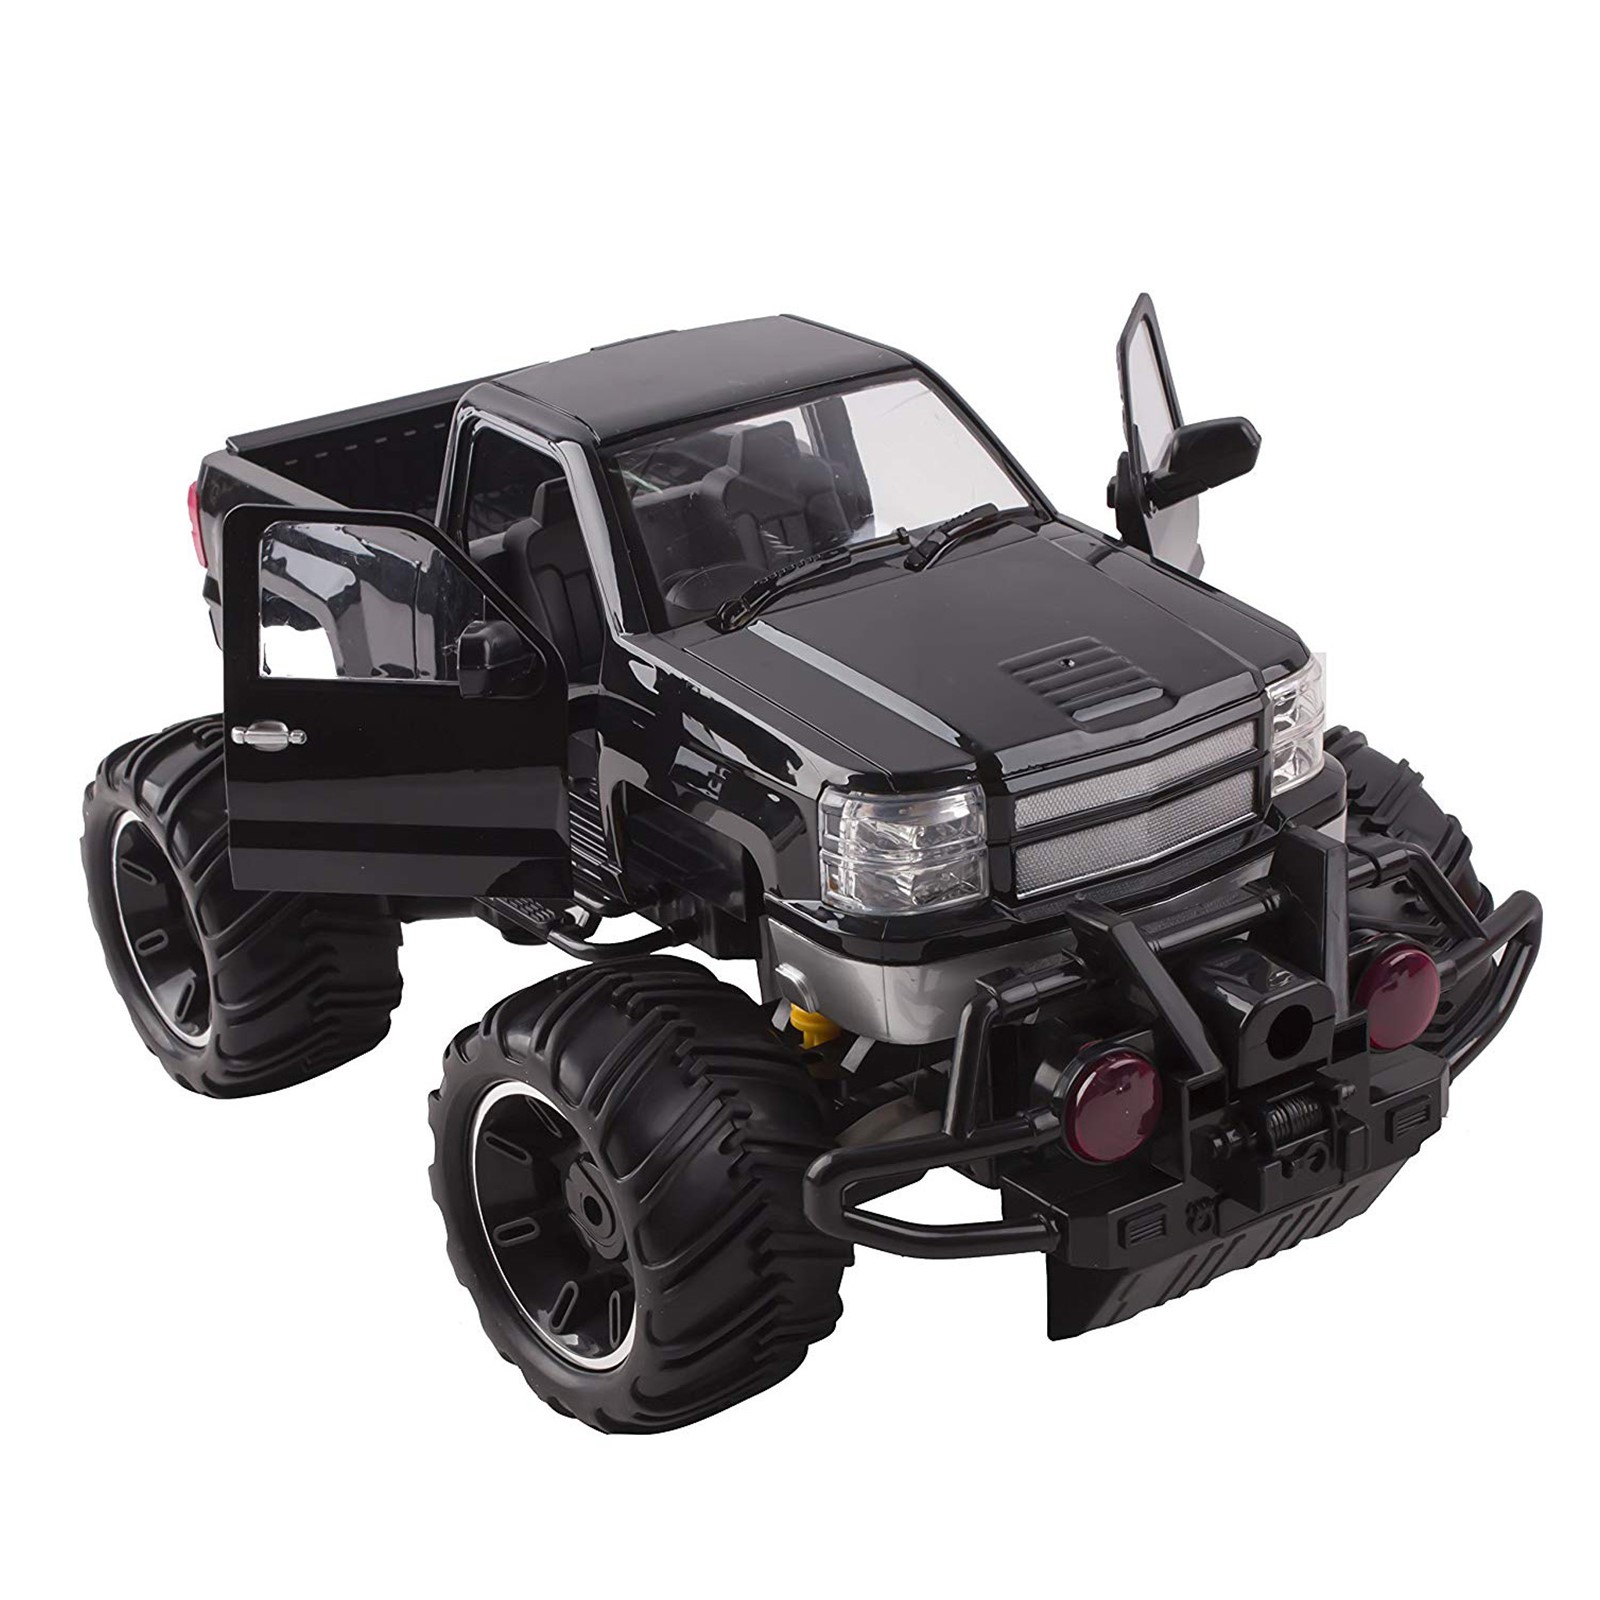 Big Wheel Beast RC Monster Truck Remote Control Doors Opening Car Light Up LED Headlights Ready to Run INCLUDES RECHARGEABLE BATTERY 1:14 Size Off-Road Pick Up Buggy Toy (Black)